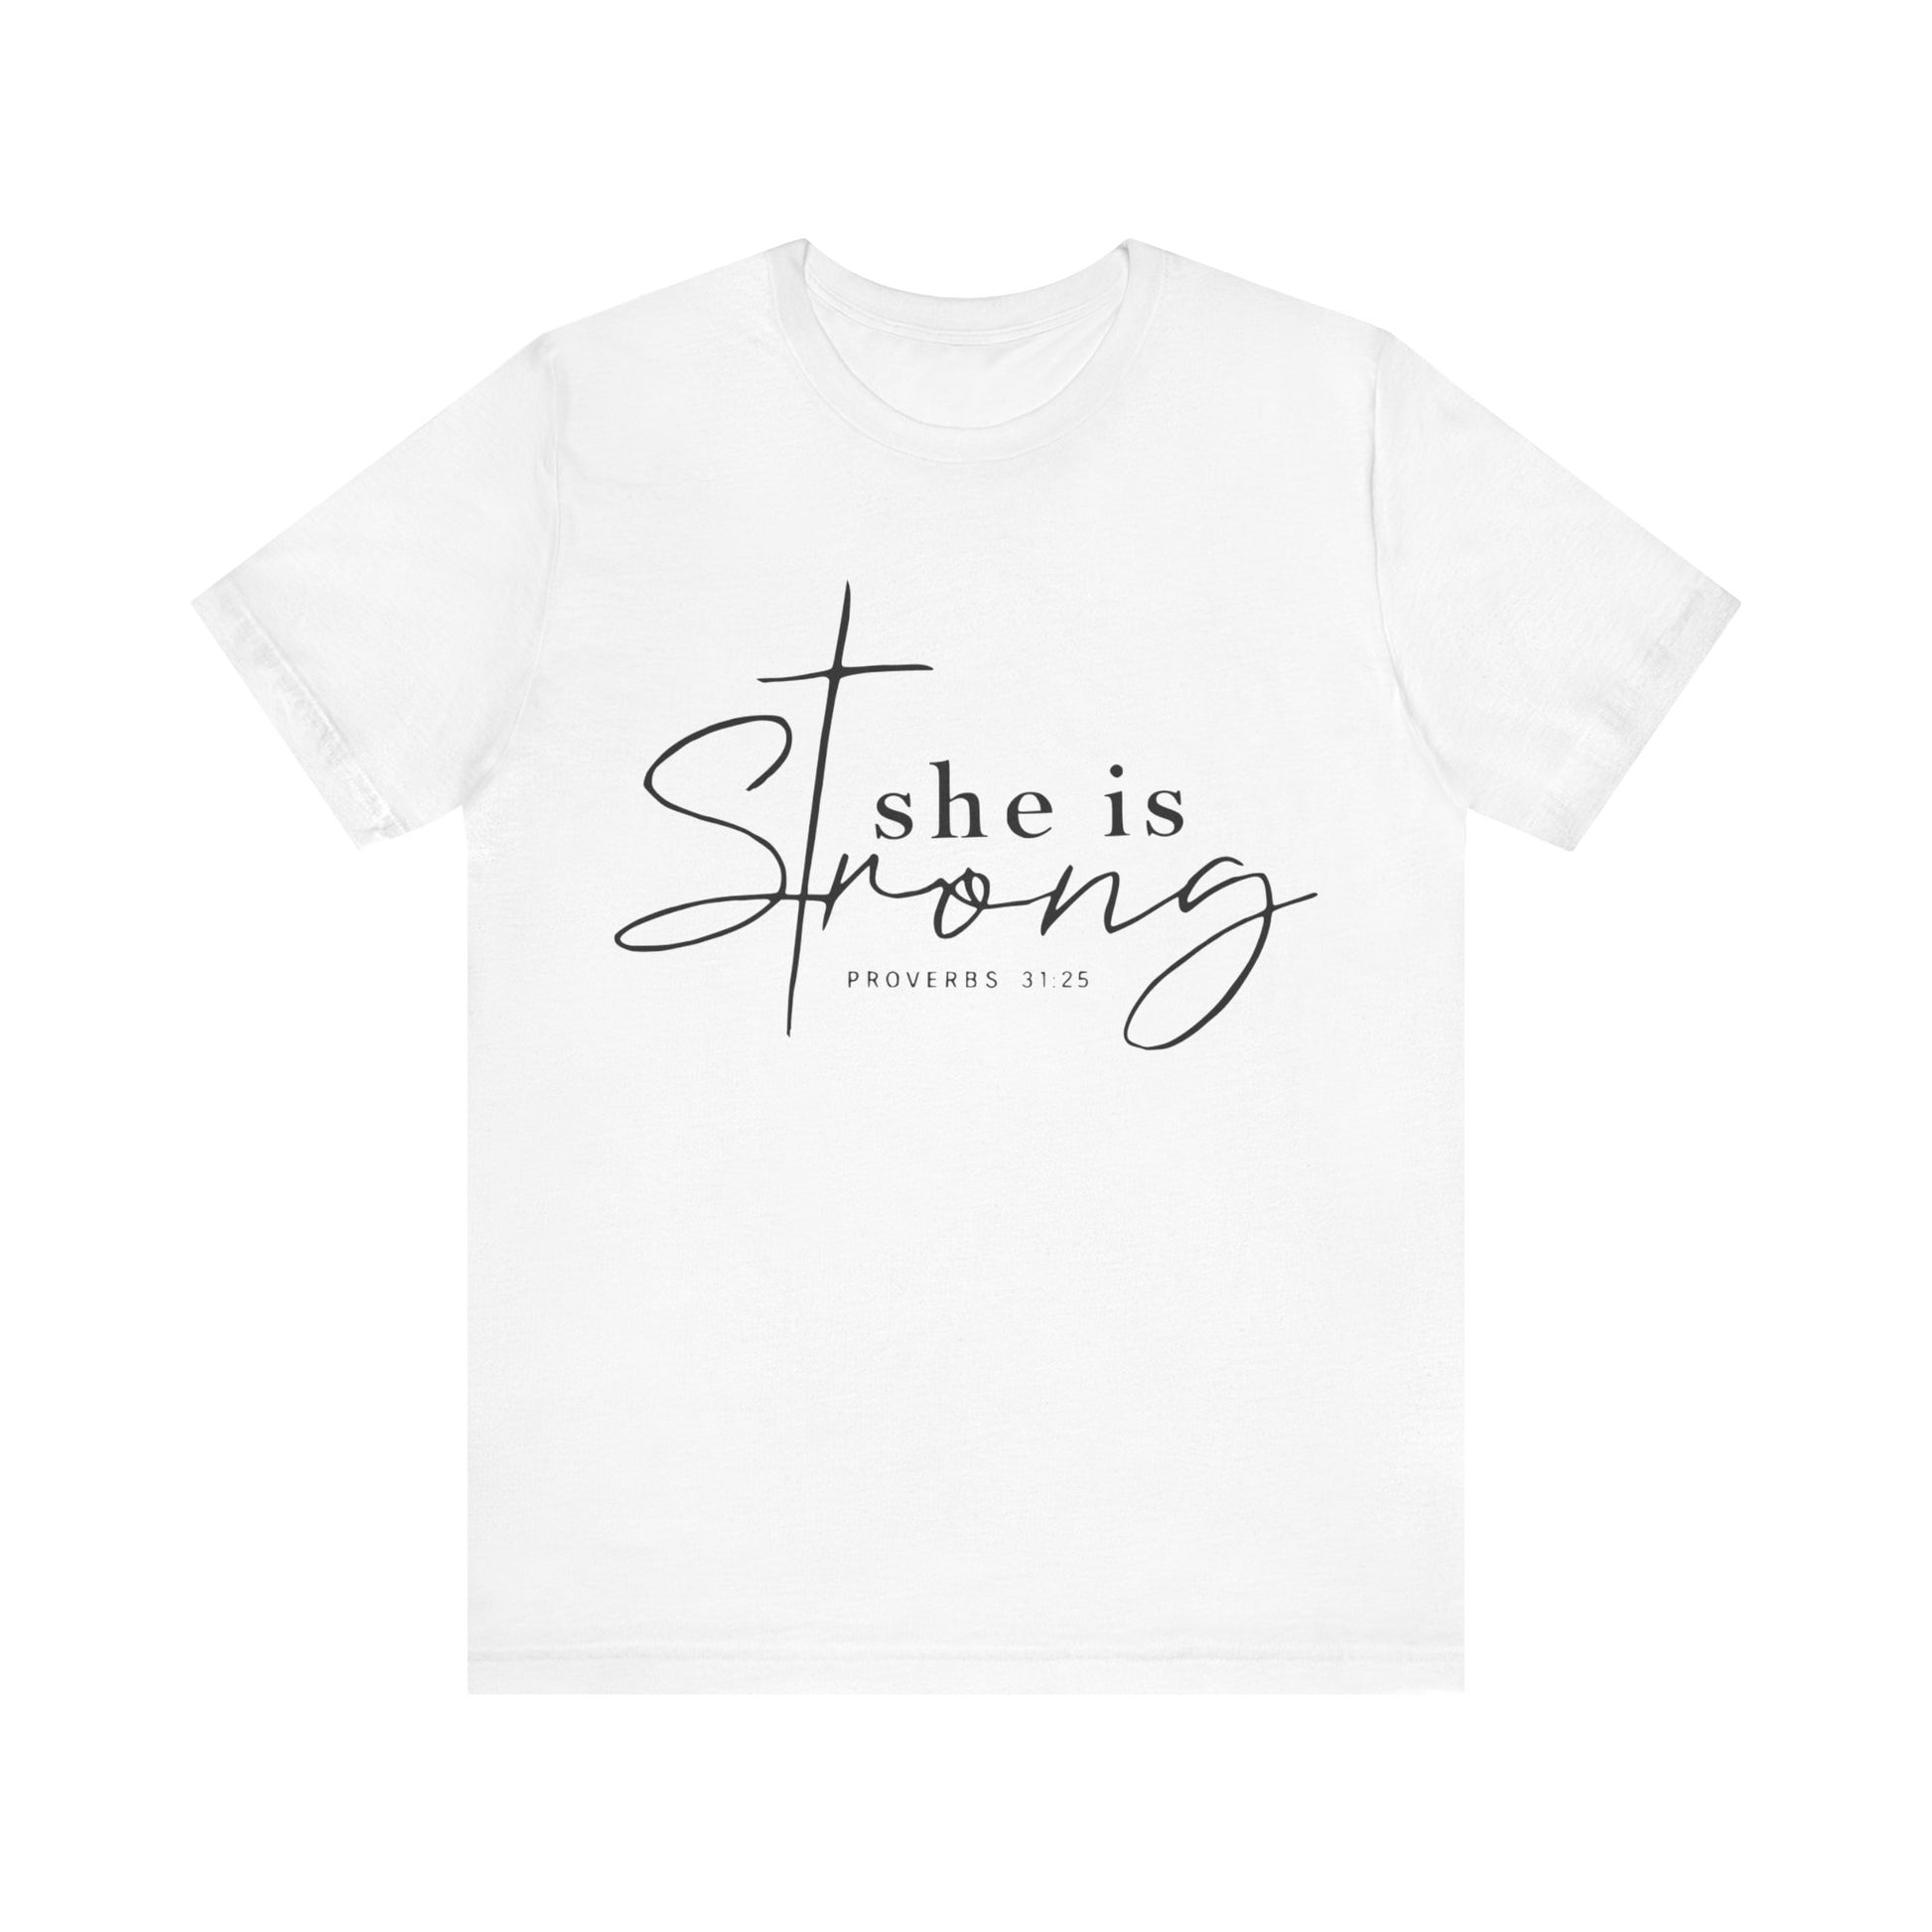 "Christian Scripture Tee for Women with Cross Design"